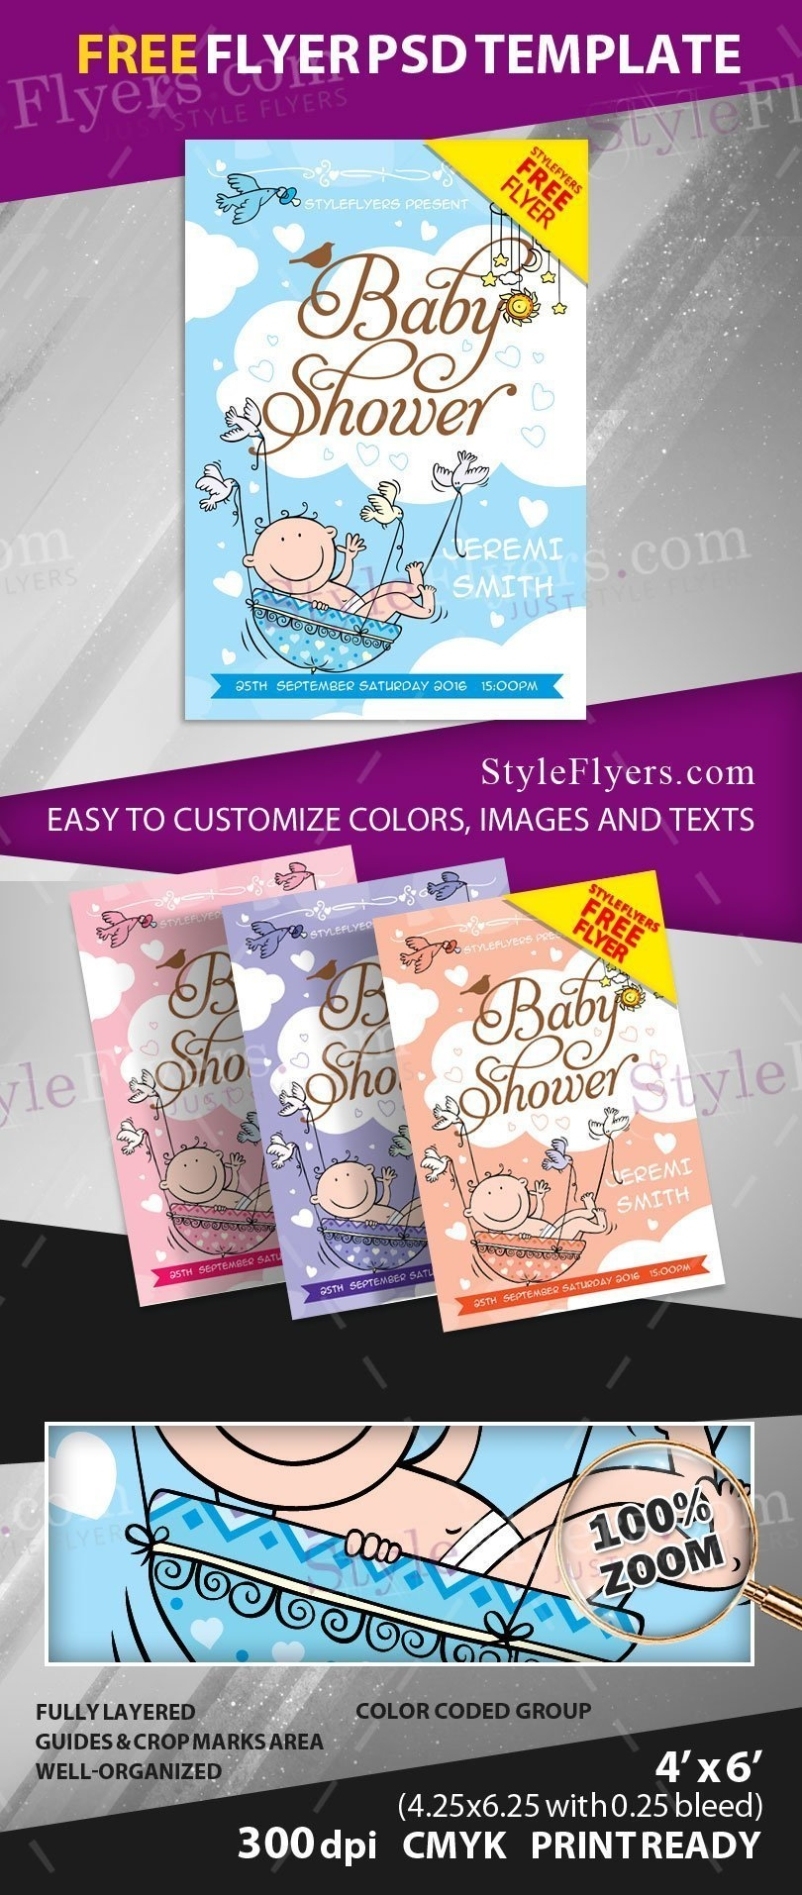 Baby Shower Flyer Free Psd Flyer Template Free Download #11221 – Styleflyers Intended For Baby Shower Flyer Templates Free